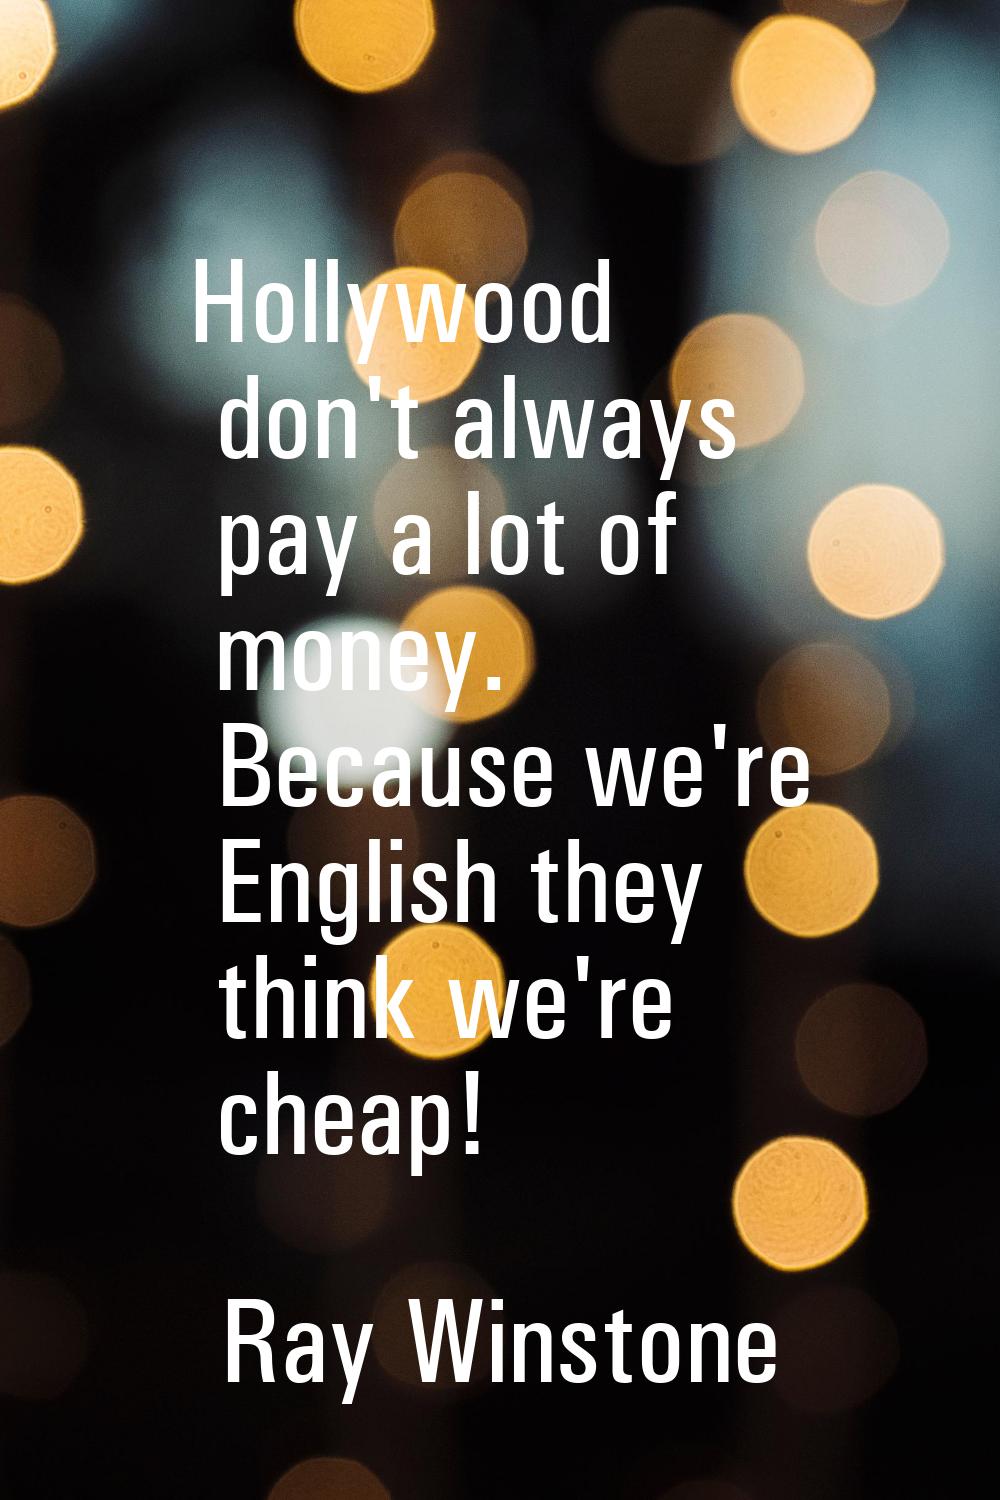 Hollywood don't always pay a lot of money. Because we're English they think we're cheap!